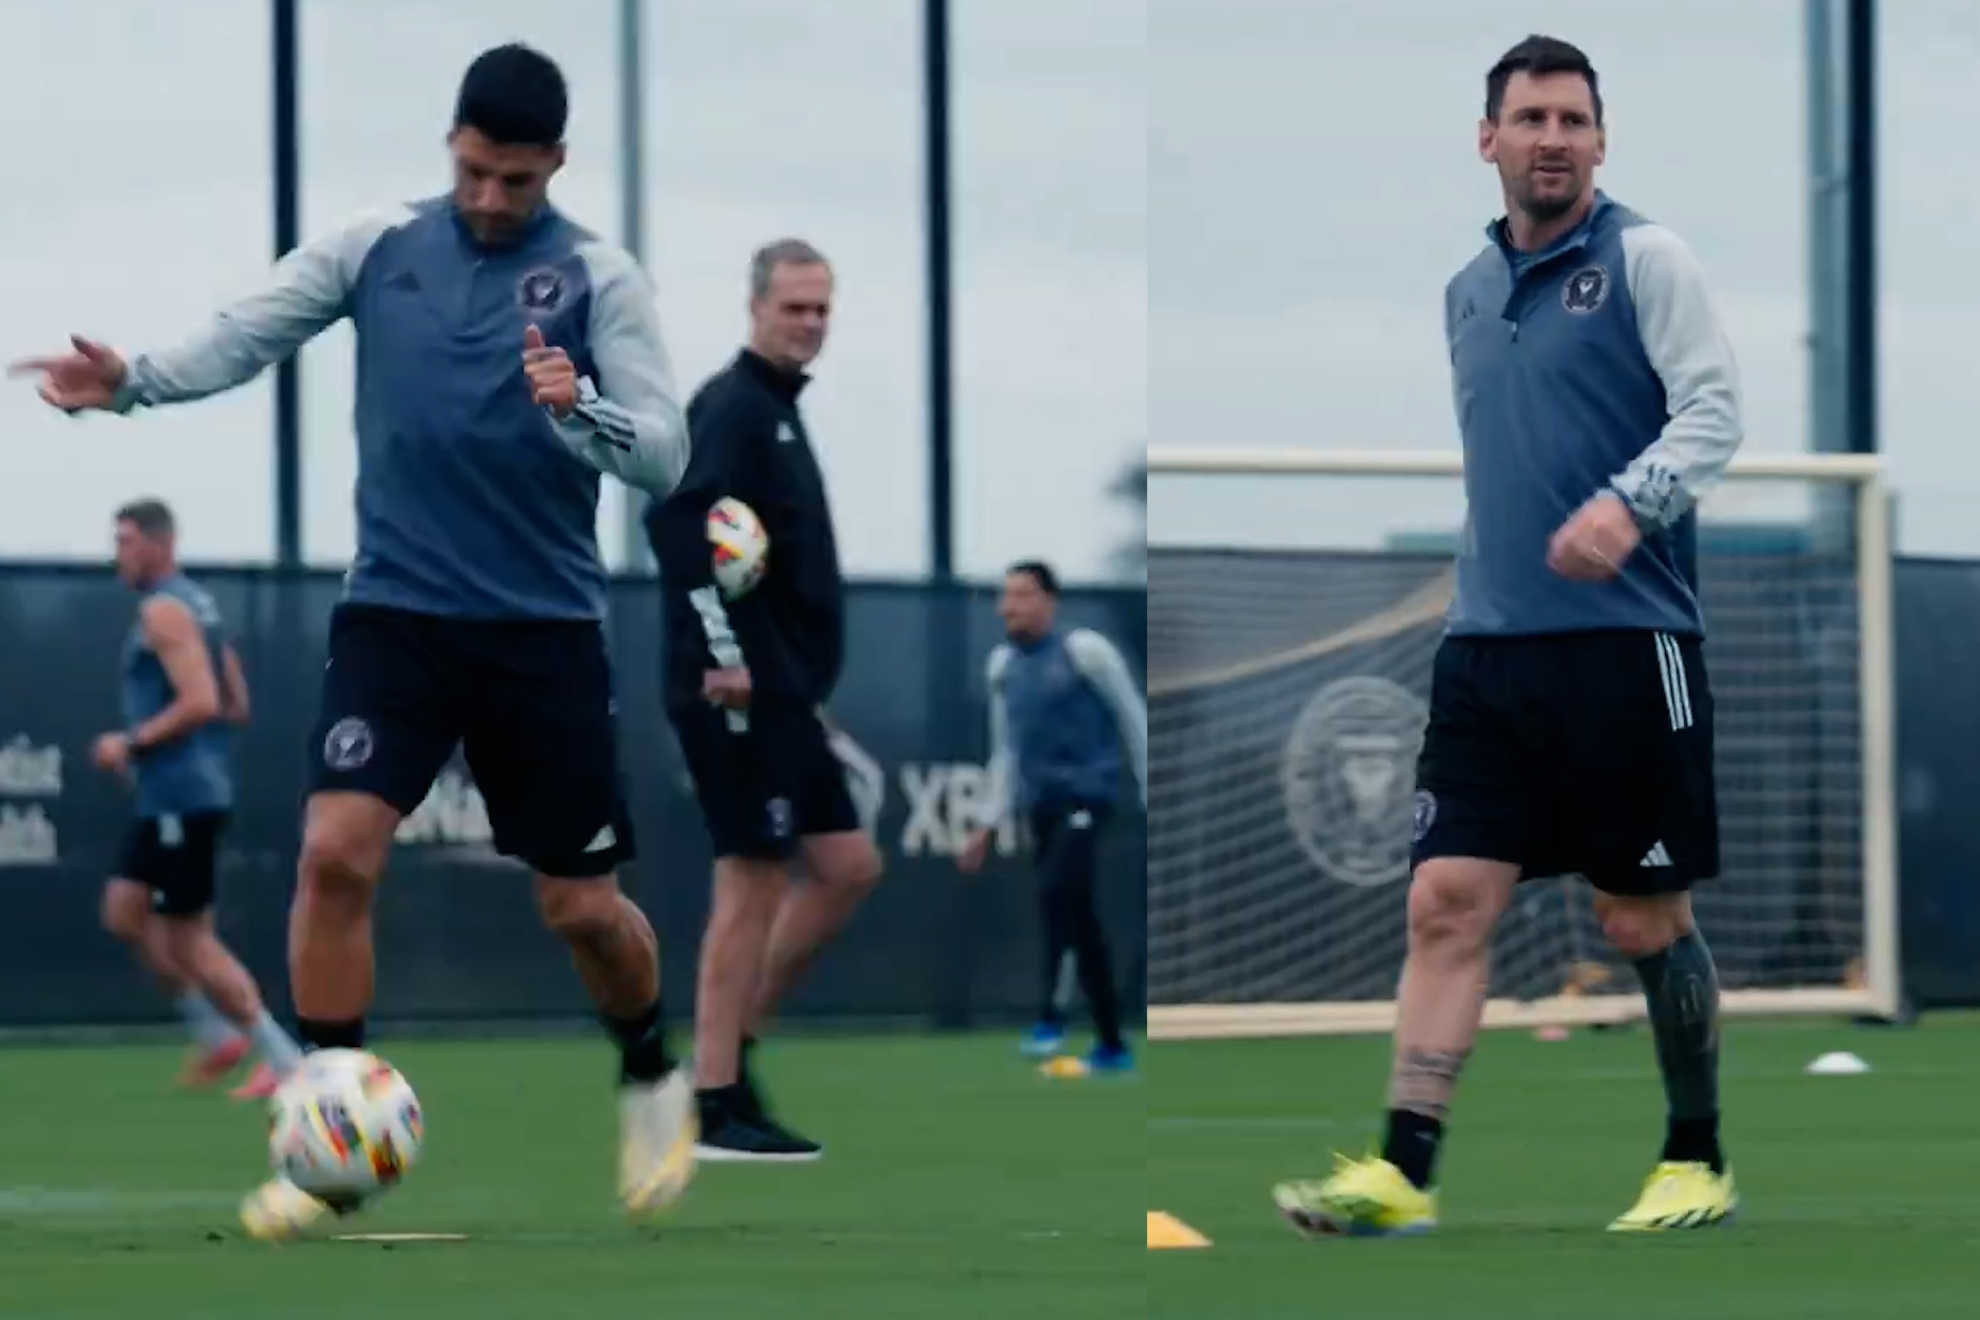 Lionel Messi and Luis Surez made their debut in the teams first training session